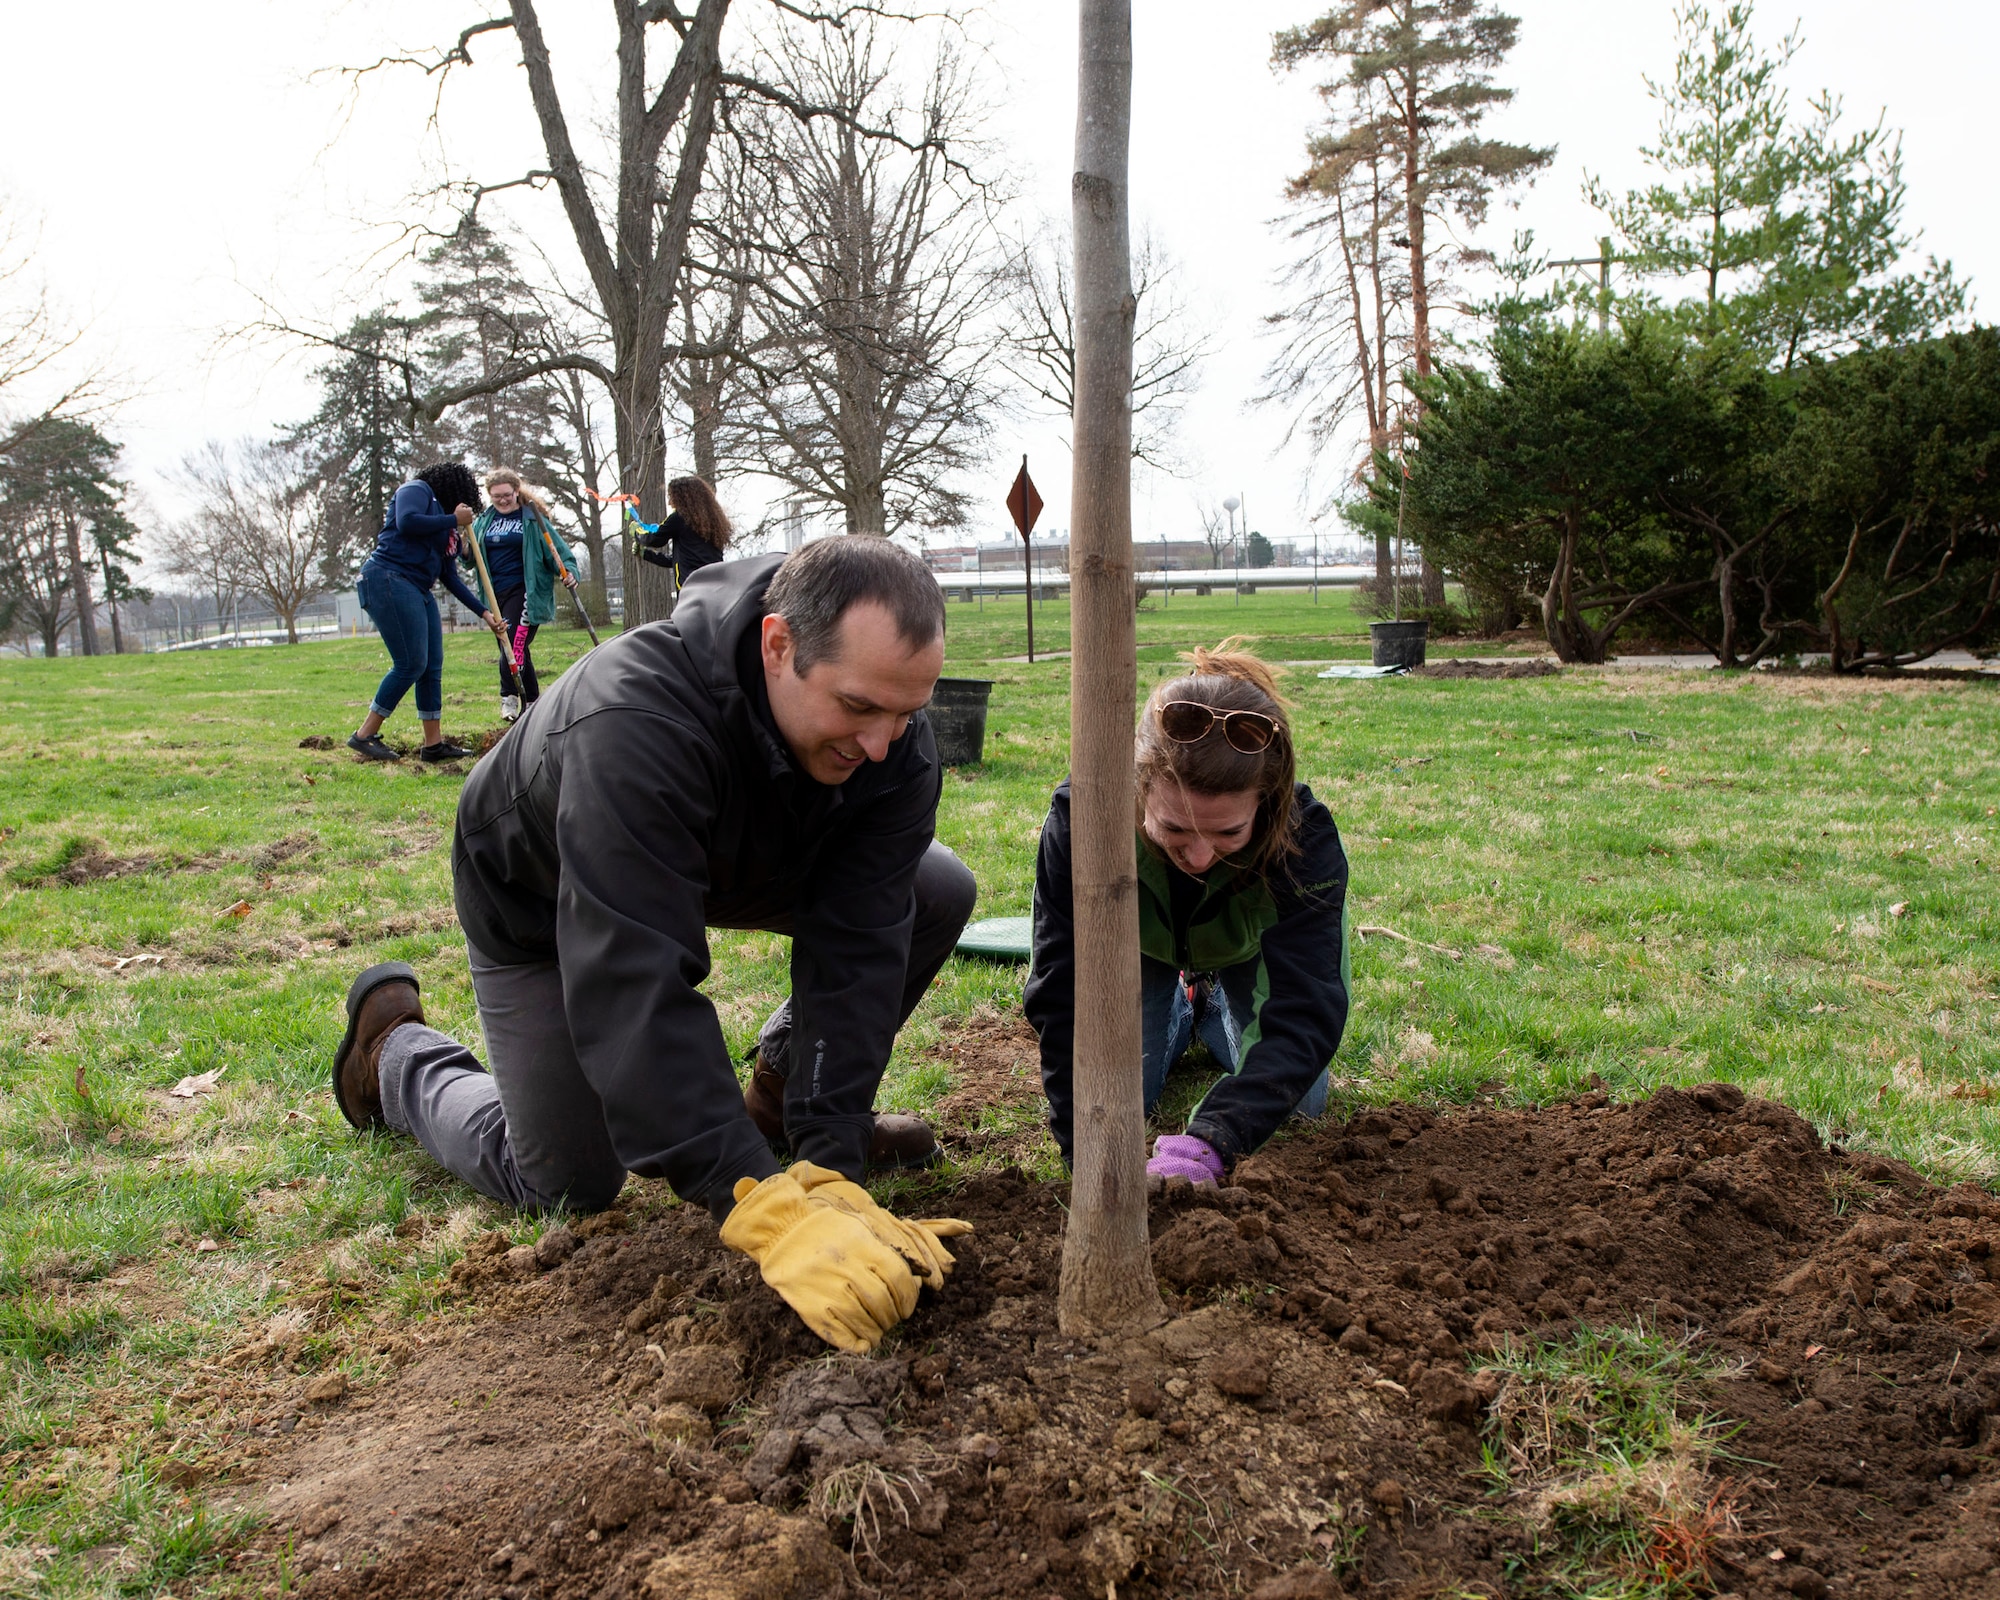 Michael Vaugh, (left) 88th Civil Engineering Group, hazardous waste program manager and Mandy Taylor, Fairborn High School environmental science teacher, pack dirt around a redbud tree as part of the 88th Civil Engineer Group and the National Park Service volunteer efforts for Arbor Day on the grounds near the Wright Brothers Memorial, Dayton, Ohio, April 11, 2019. Taylor’s advanced placement students planted a total of 26 trees in support of Arbor Day to protect trees and woodlands. (U.S. Air Force photo by Michelle Gigante)